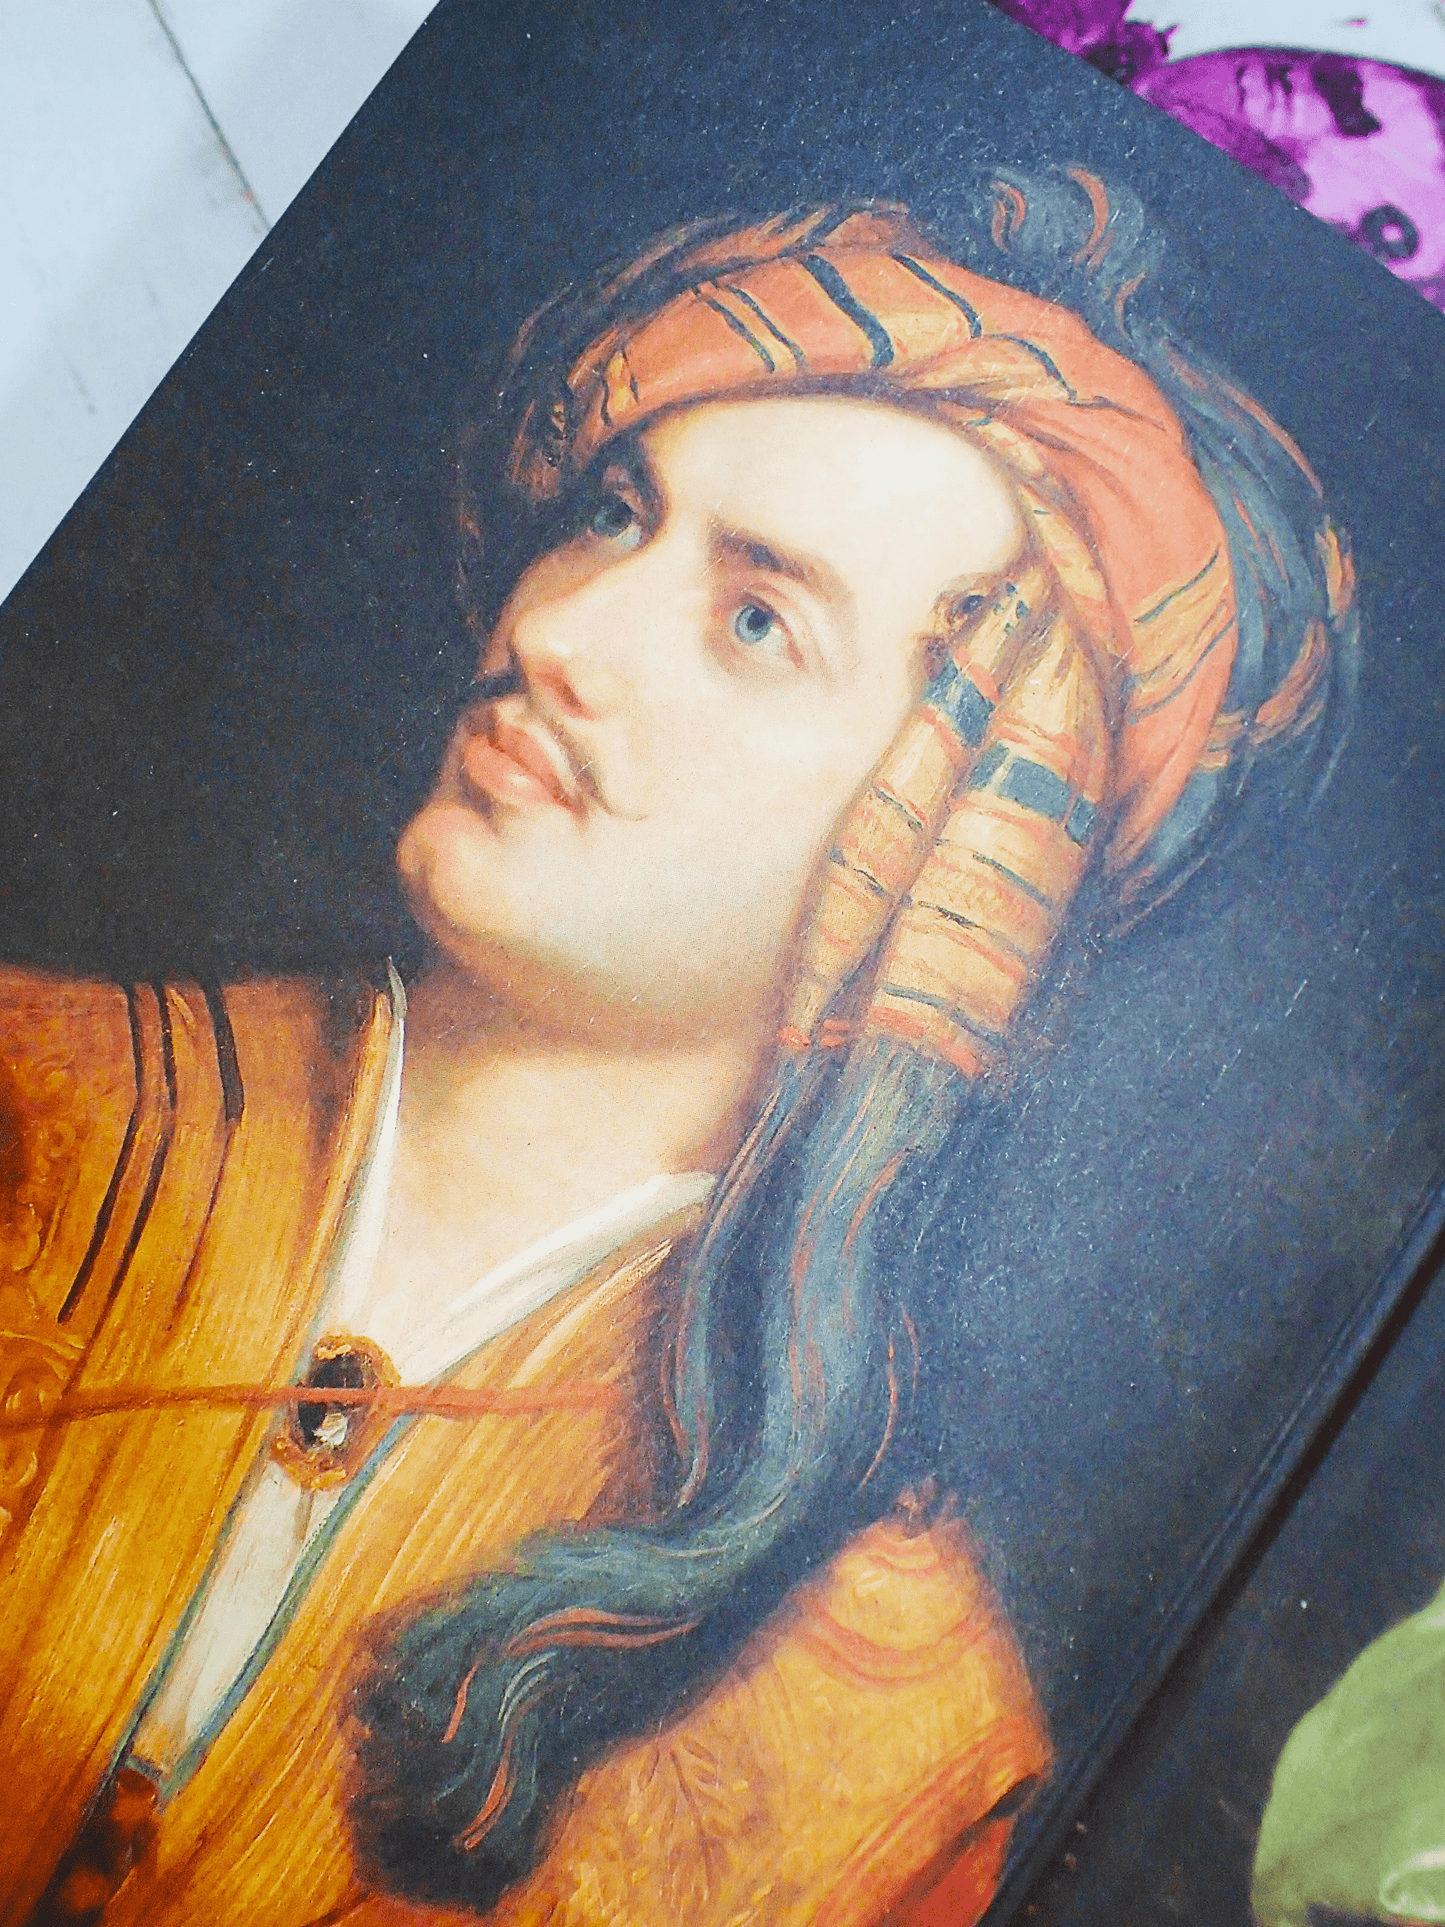 Decorated endpapers of The Bride of Science Benjamin Woolley Ada Lovelace Byron Biography Vintage Book 1999 showing portrait of Lord Byron.